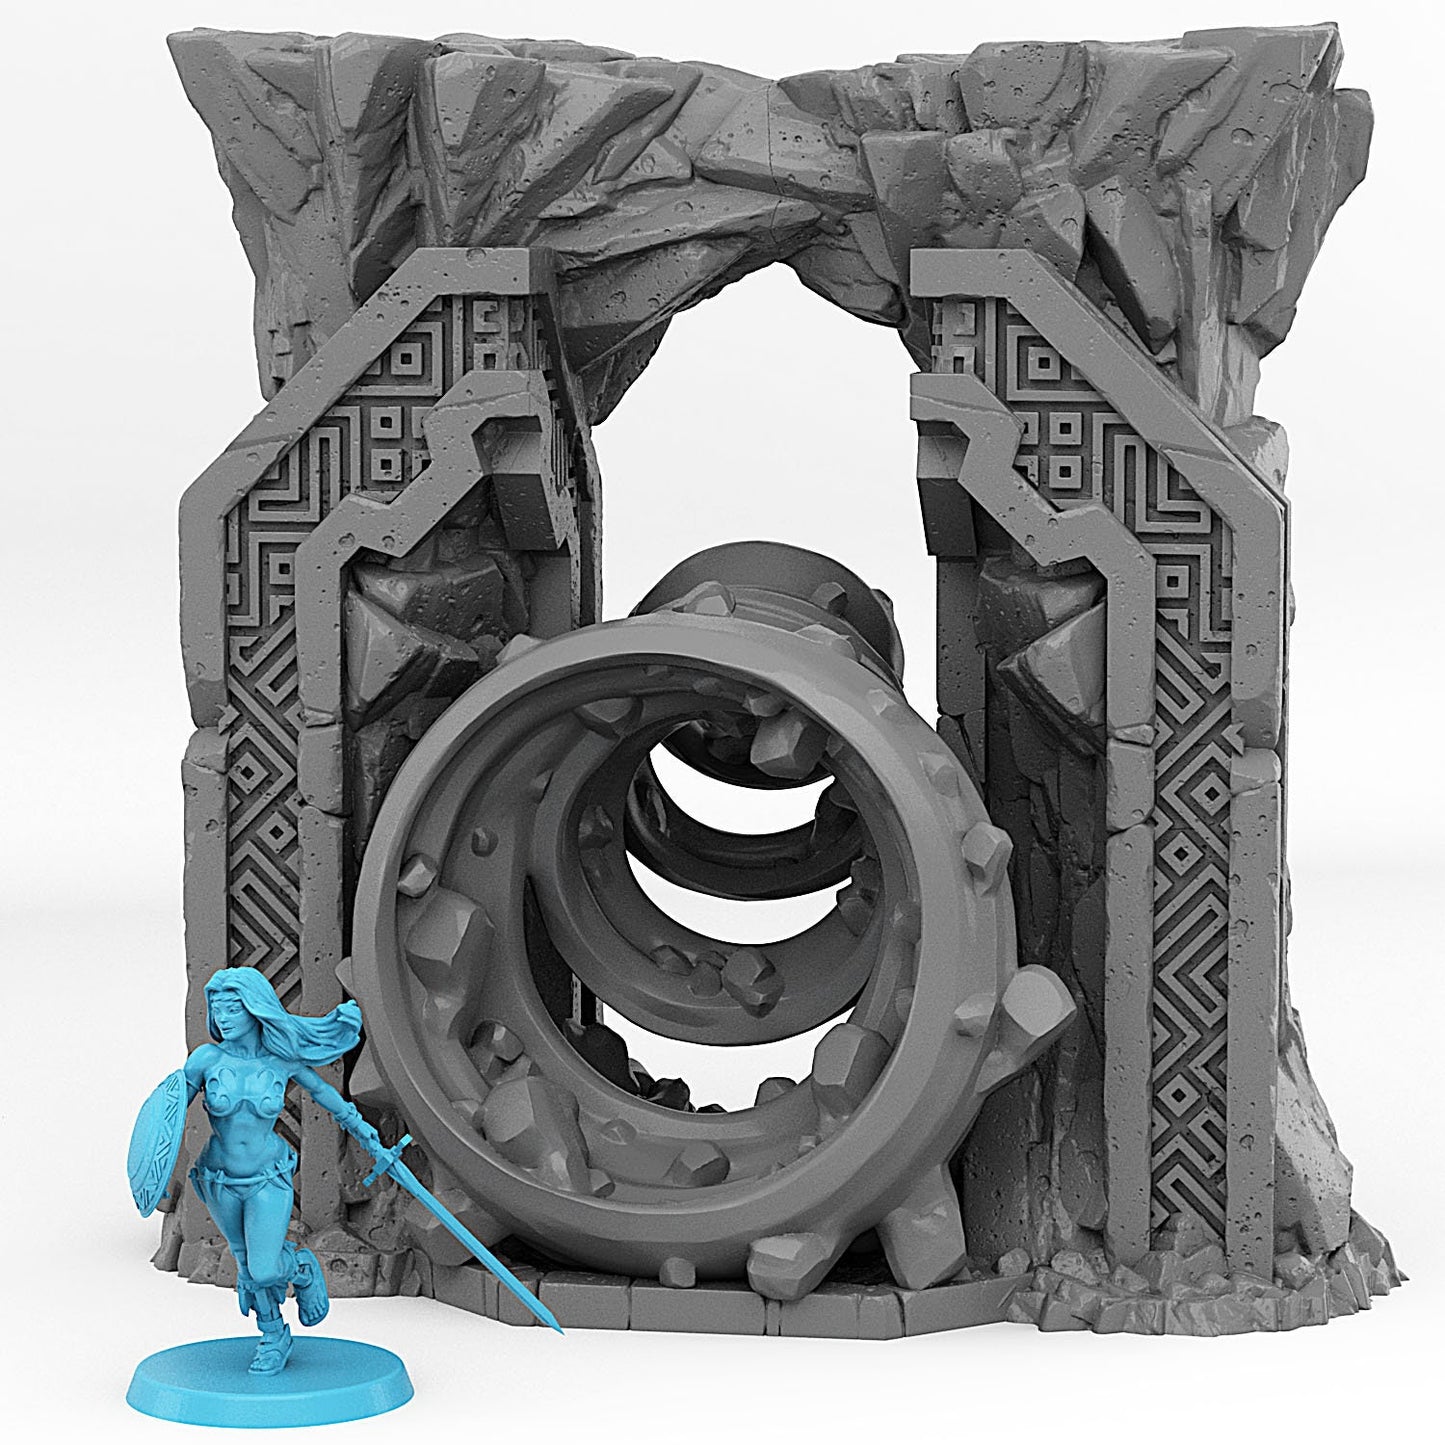 Dwarf Portal | Scenery and terrain | 3D Printed Resin Miniature | Tabletop Role Playing | AoS | D&D | 40K | Pathfinder